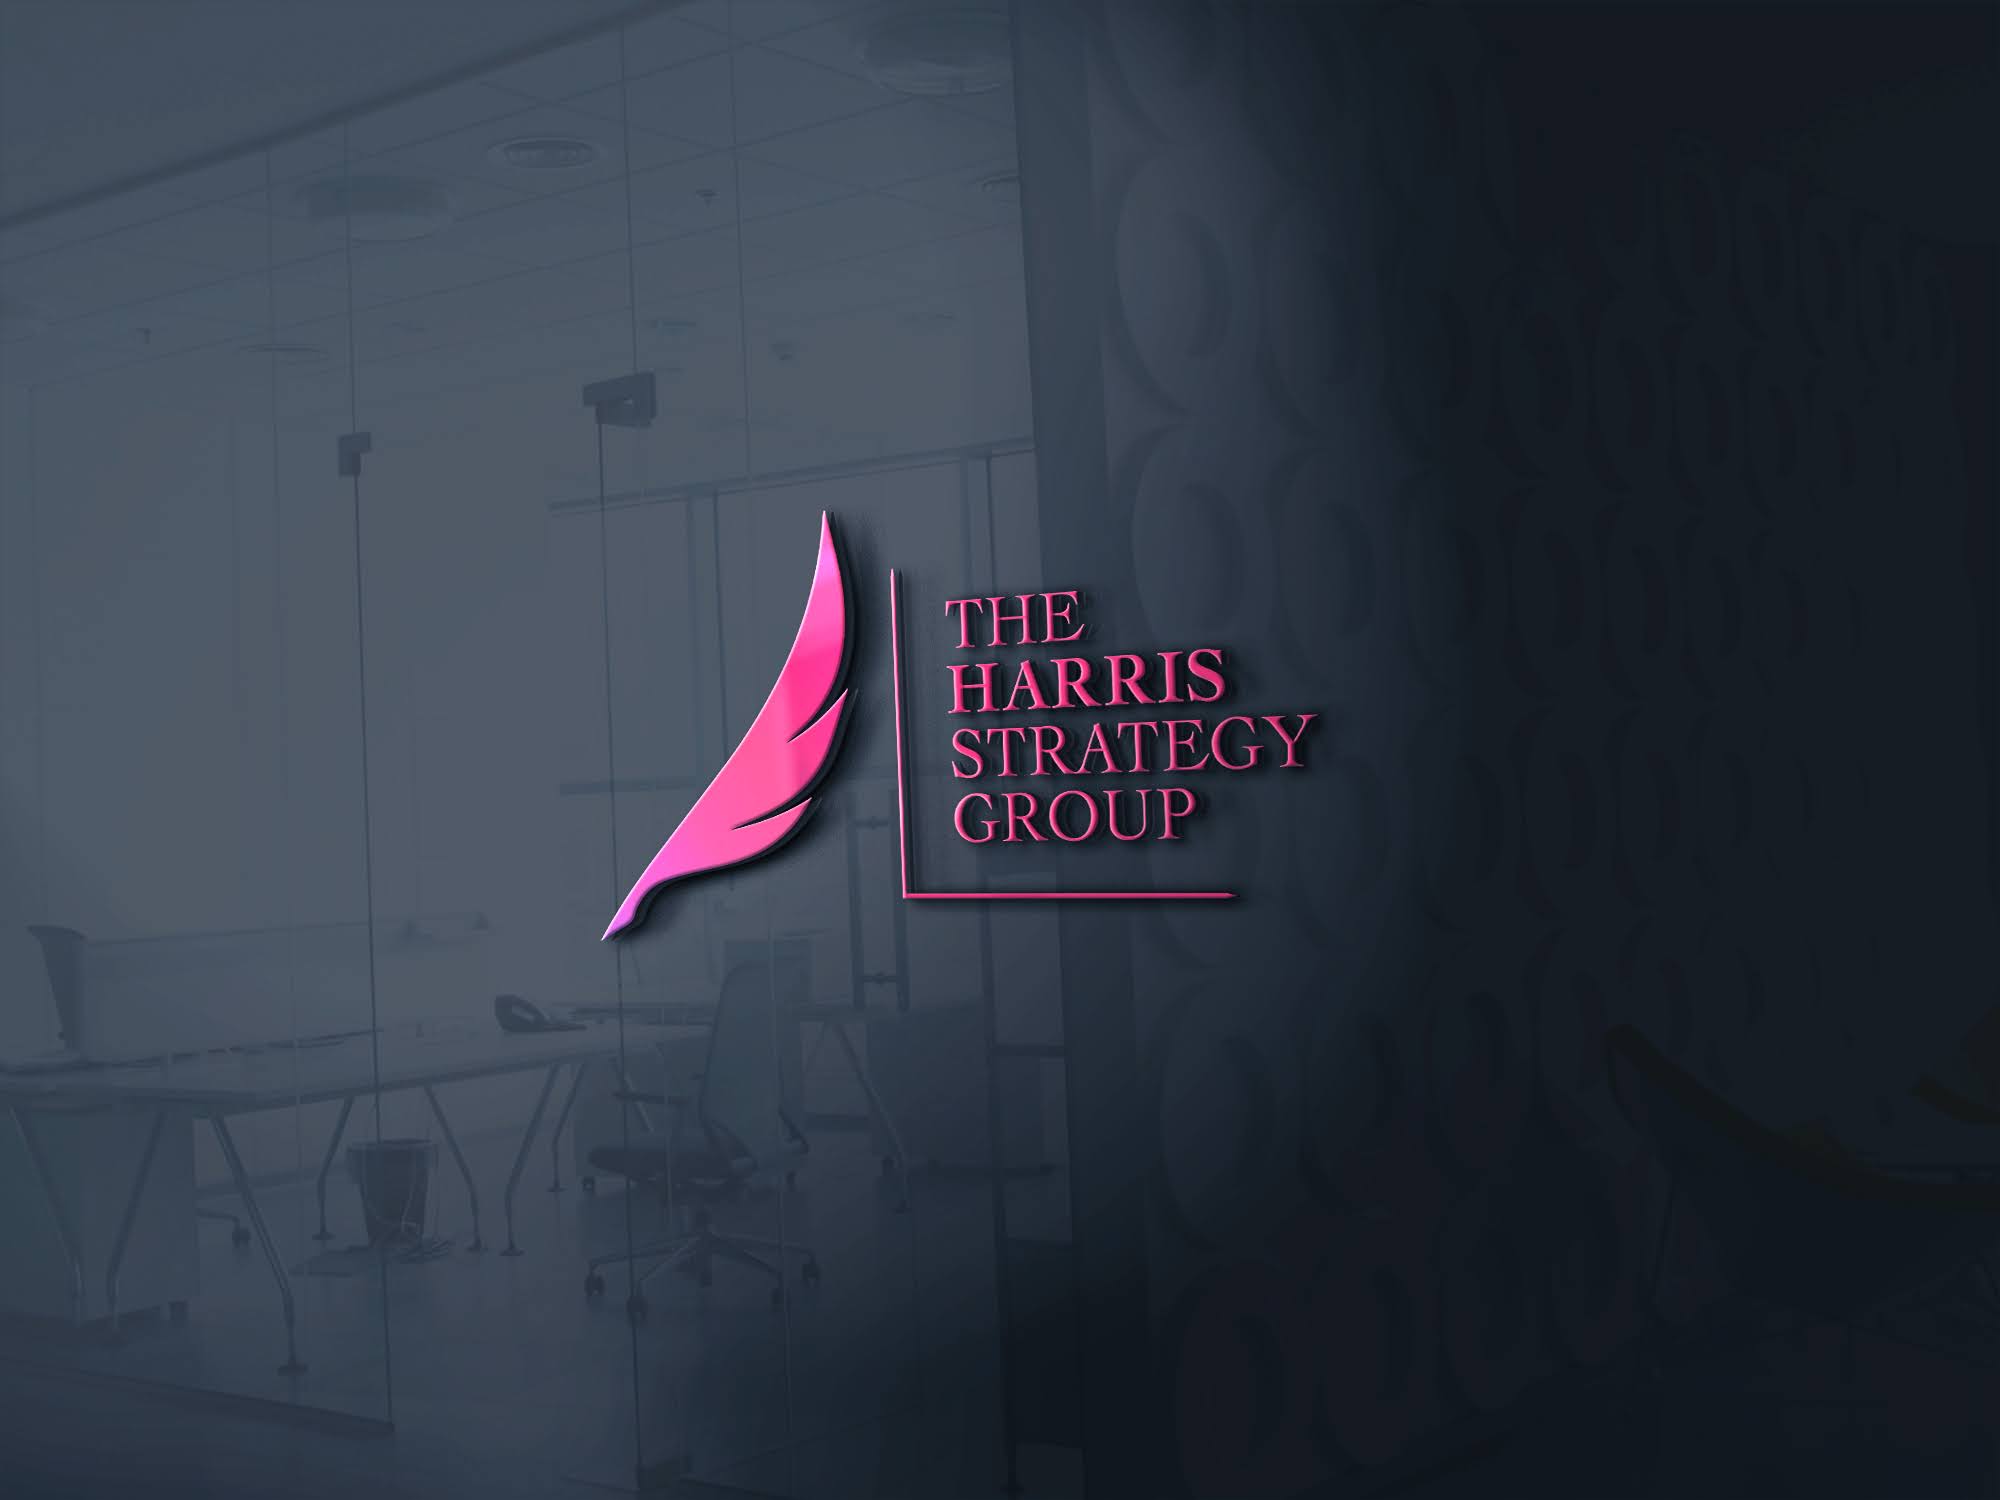 Become More Impactful - The Harris Strategy Group